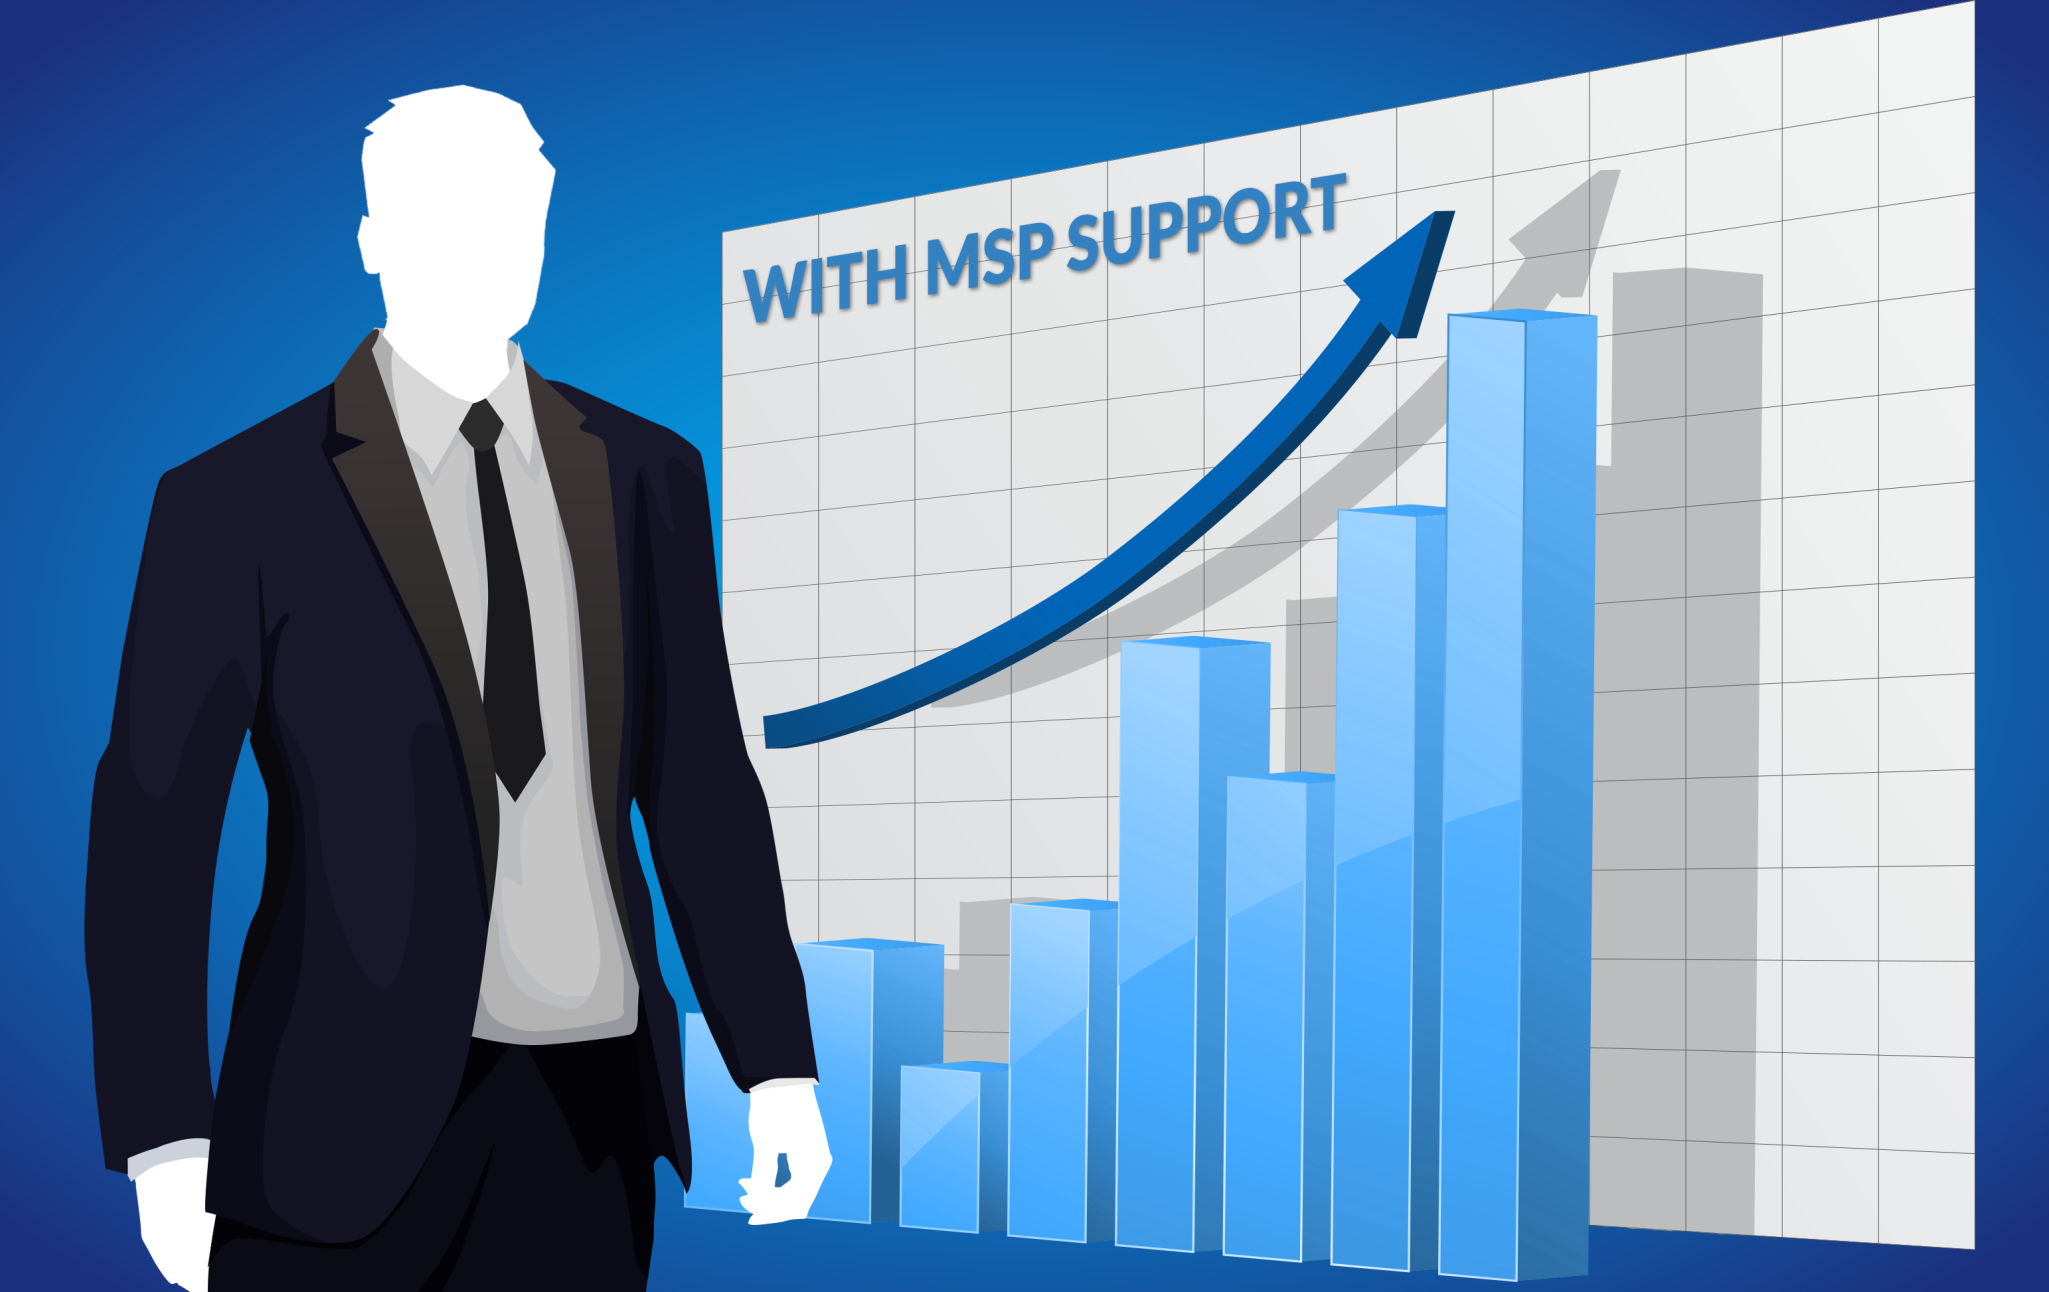 Find out why MSP support beats a Break-Fix approach to IT services.